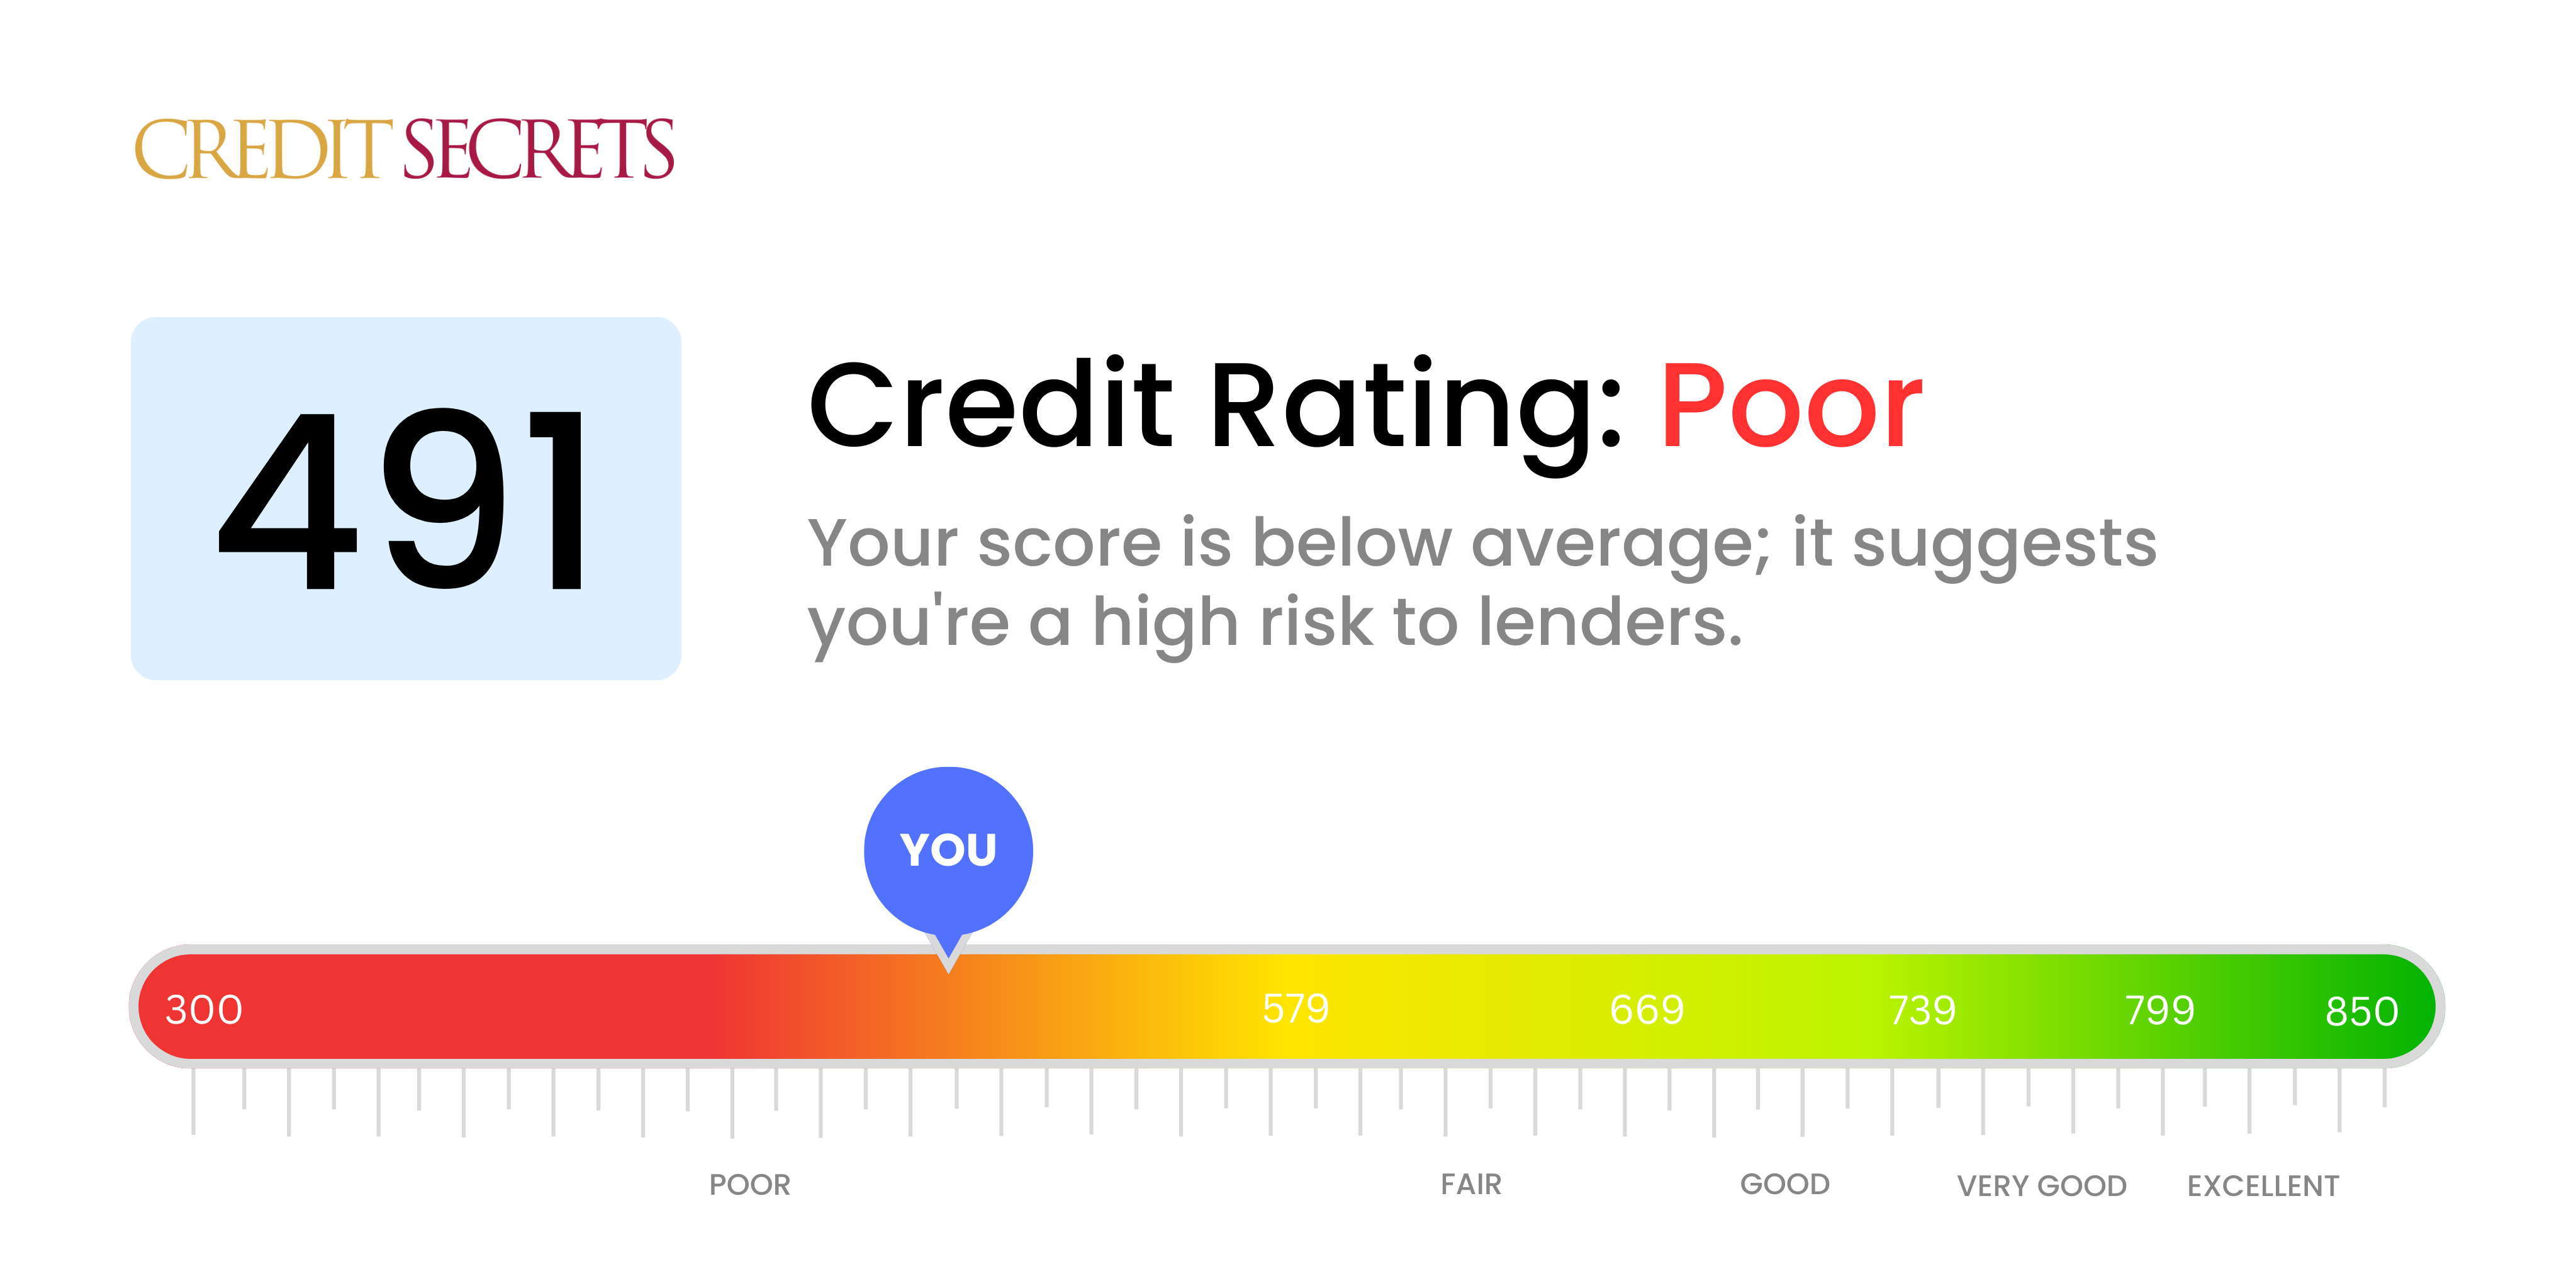 Is 491 a good credit score?